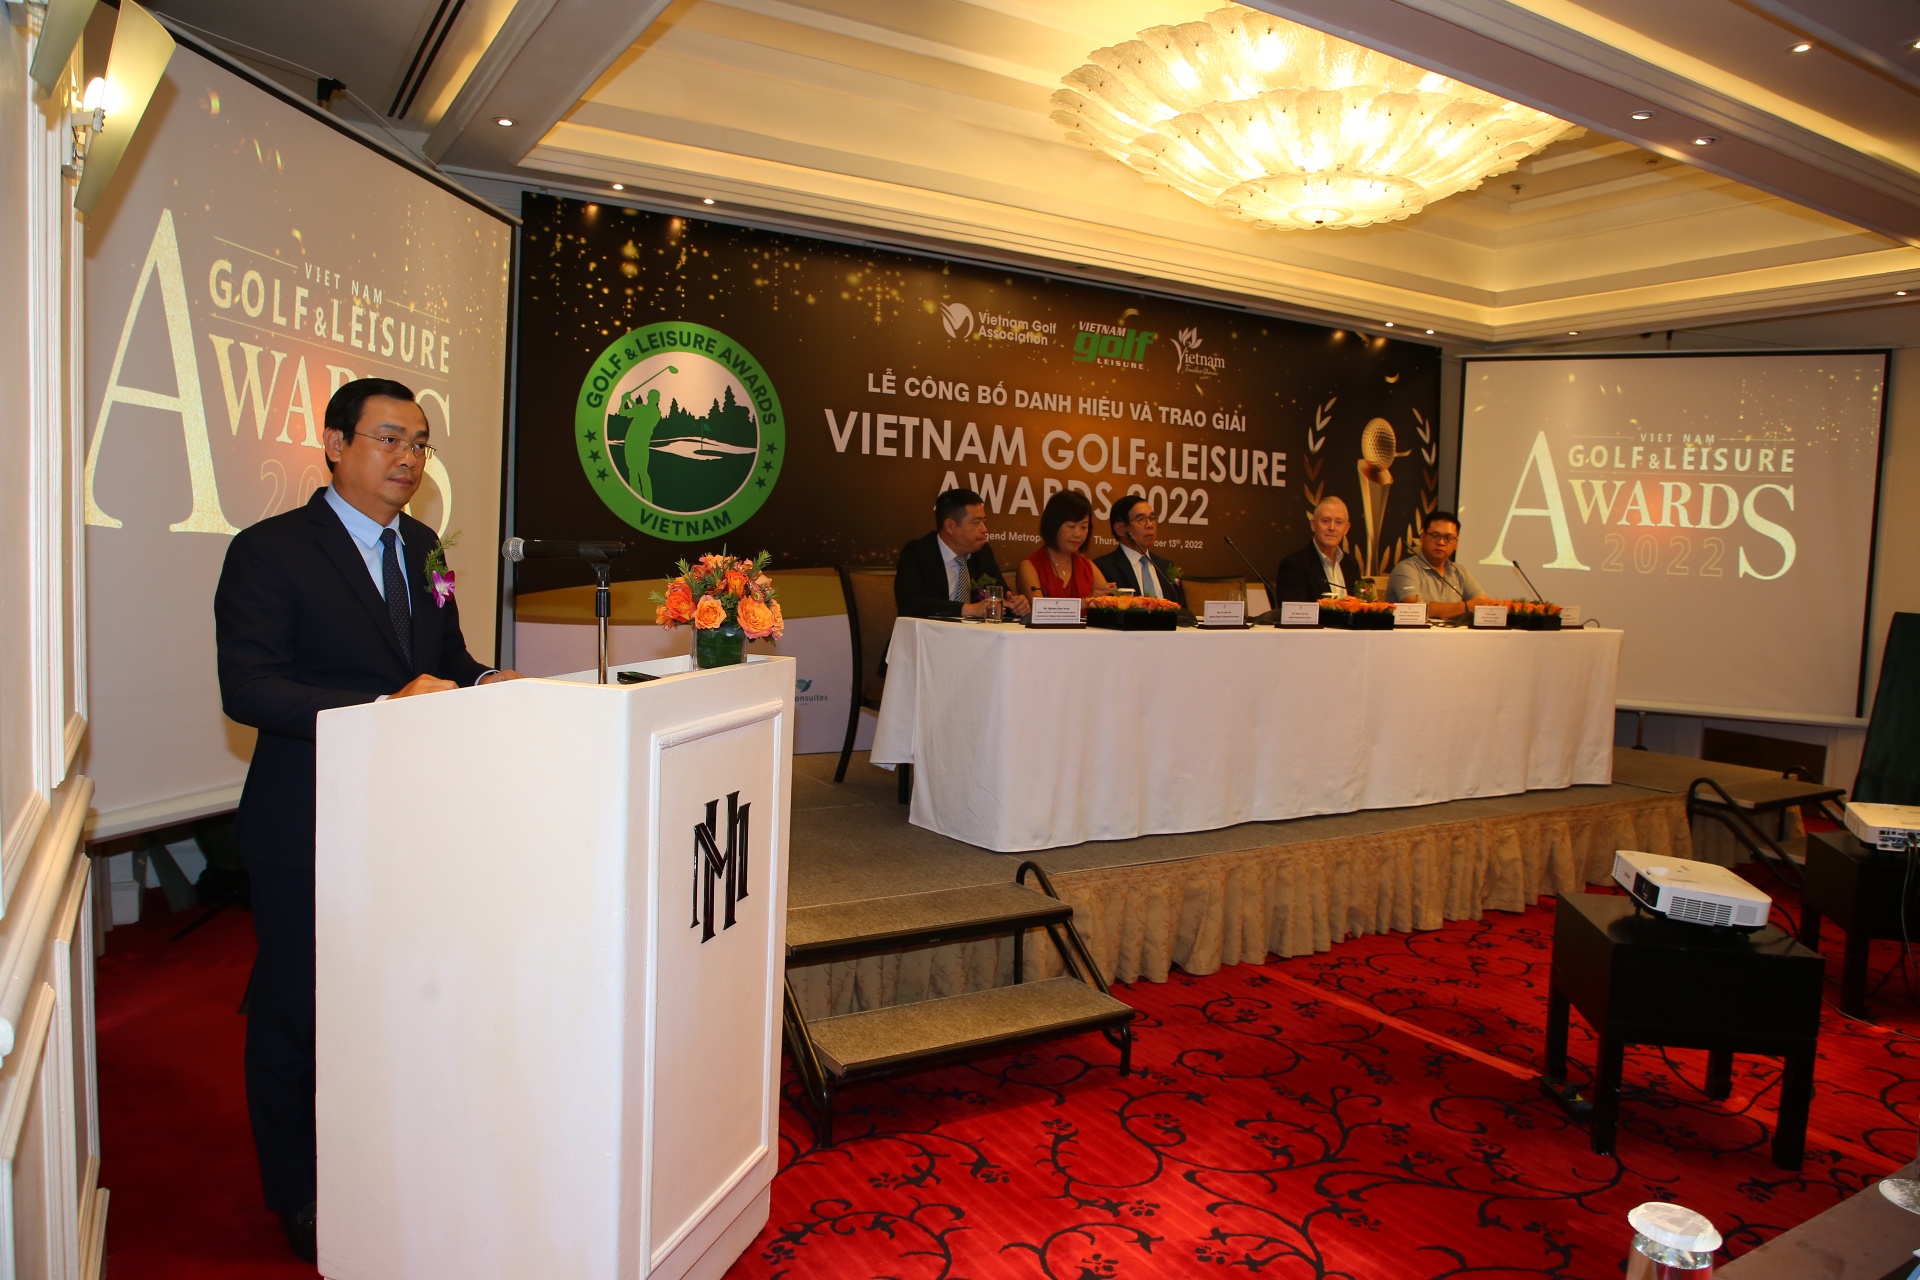 Vietnam Golf & Leisure Awards 2022 honours best golf courses and brands